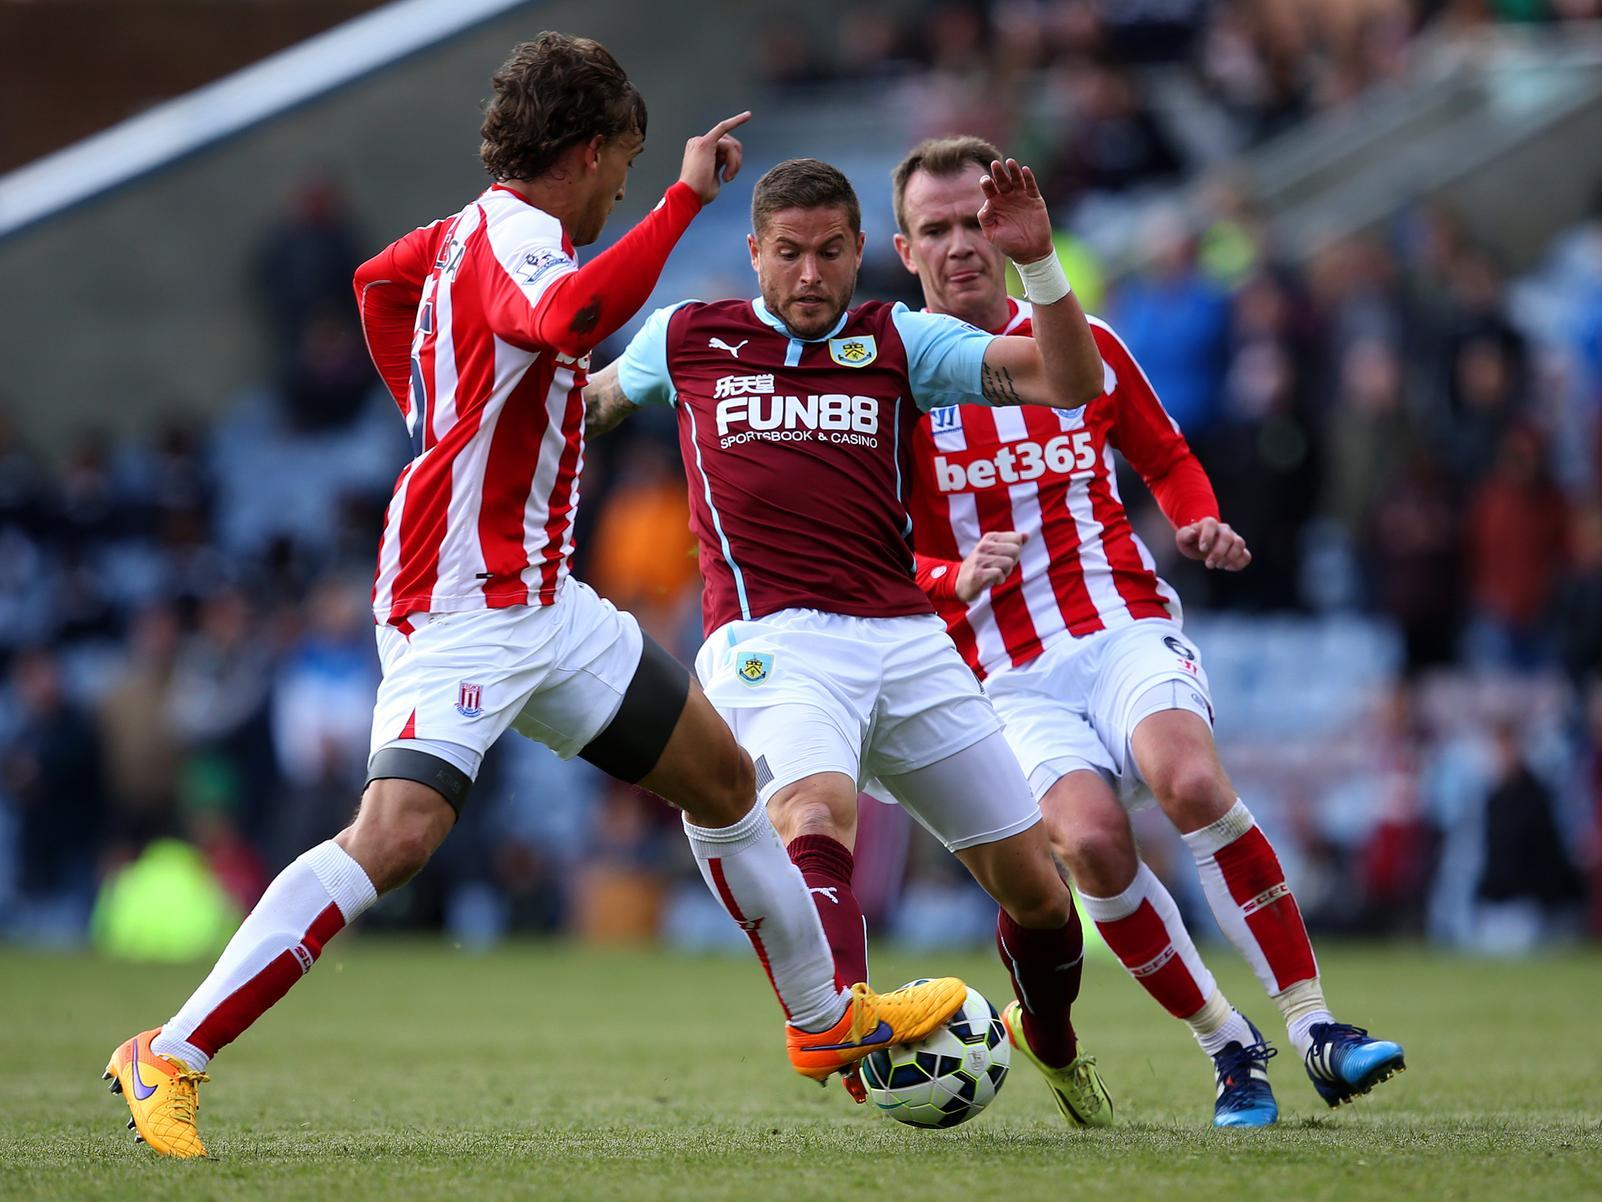 The winger made his loan move from Stoke City a permanent one in June 2014. He played 88 times for Burnley, scoring six times, including crucial goals against Blackpool, Wigan Athletic and Ipswich Town as the Clarets won promotion from the Championship.